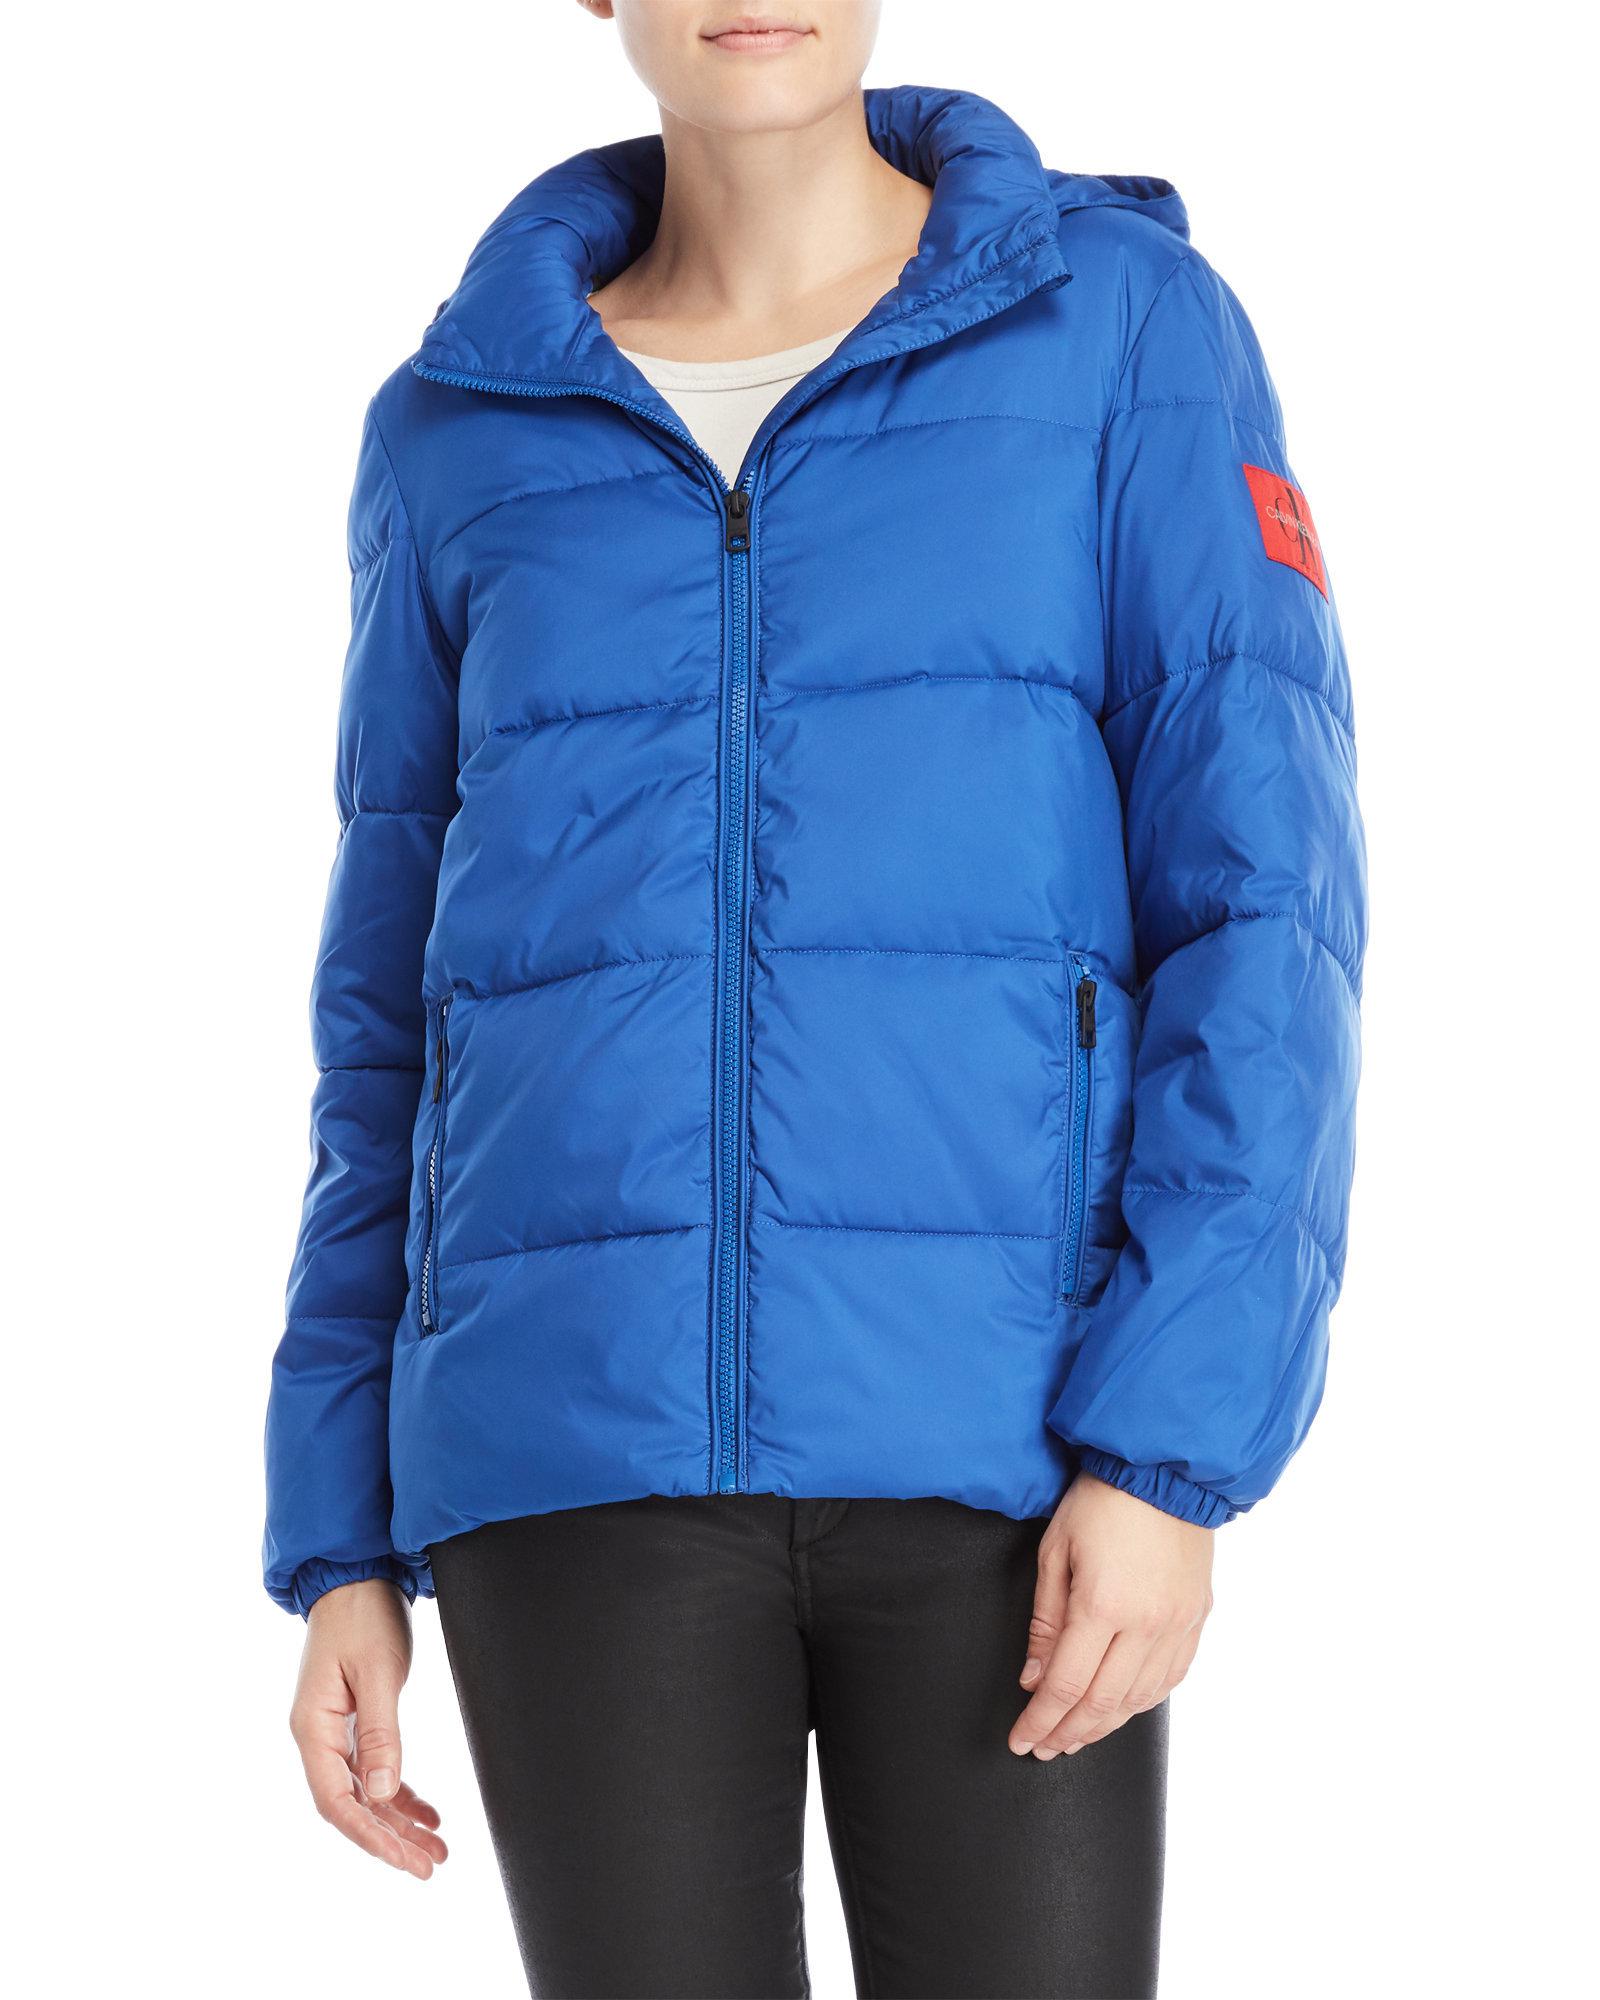 calvin klein blue puffer jacket Cheaper Than Retail Price> Buy Clothing,  Accessories and lifestyle products for women & men -